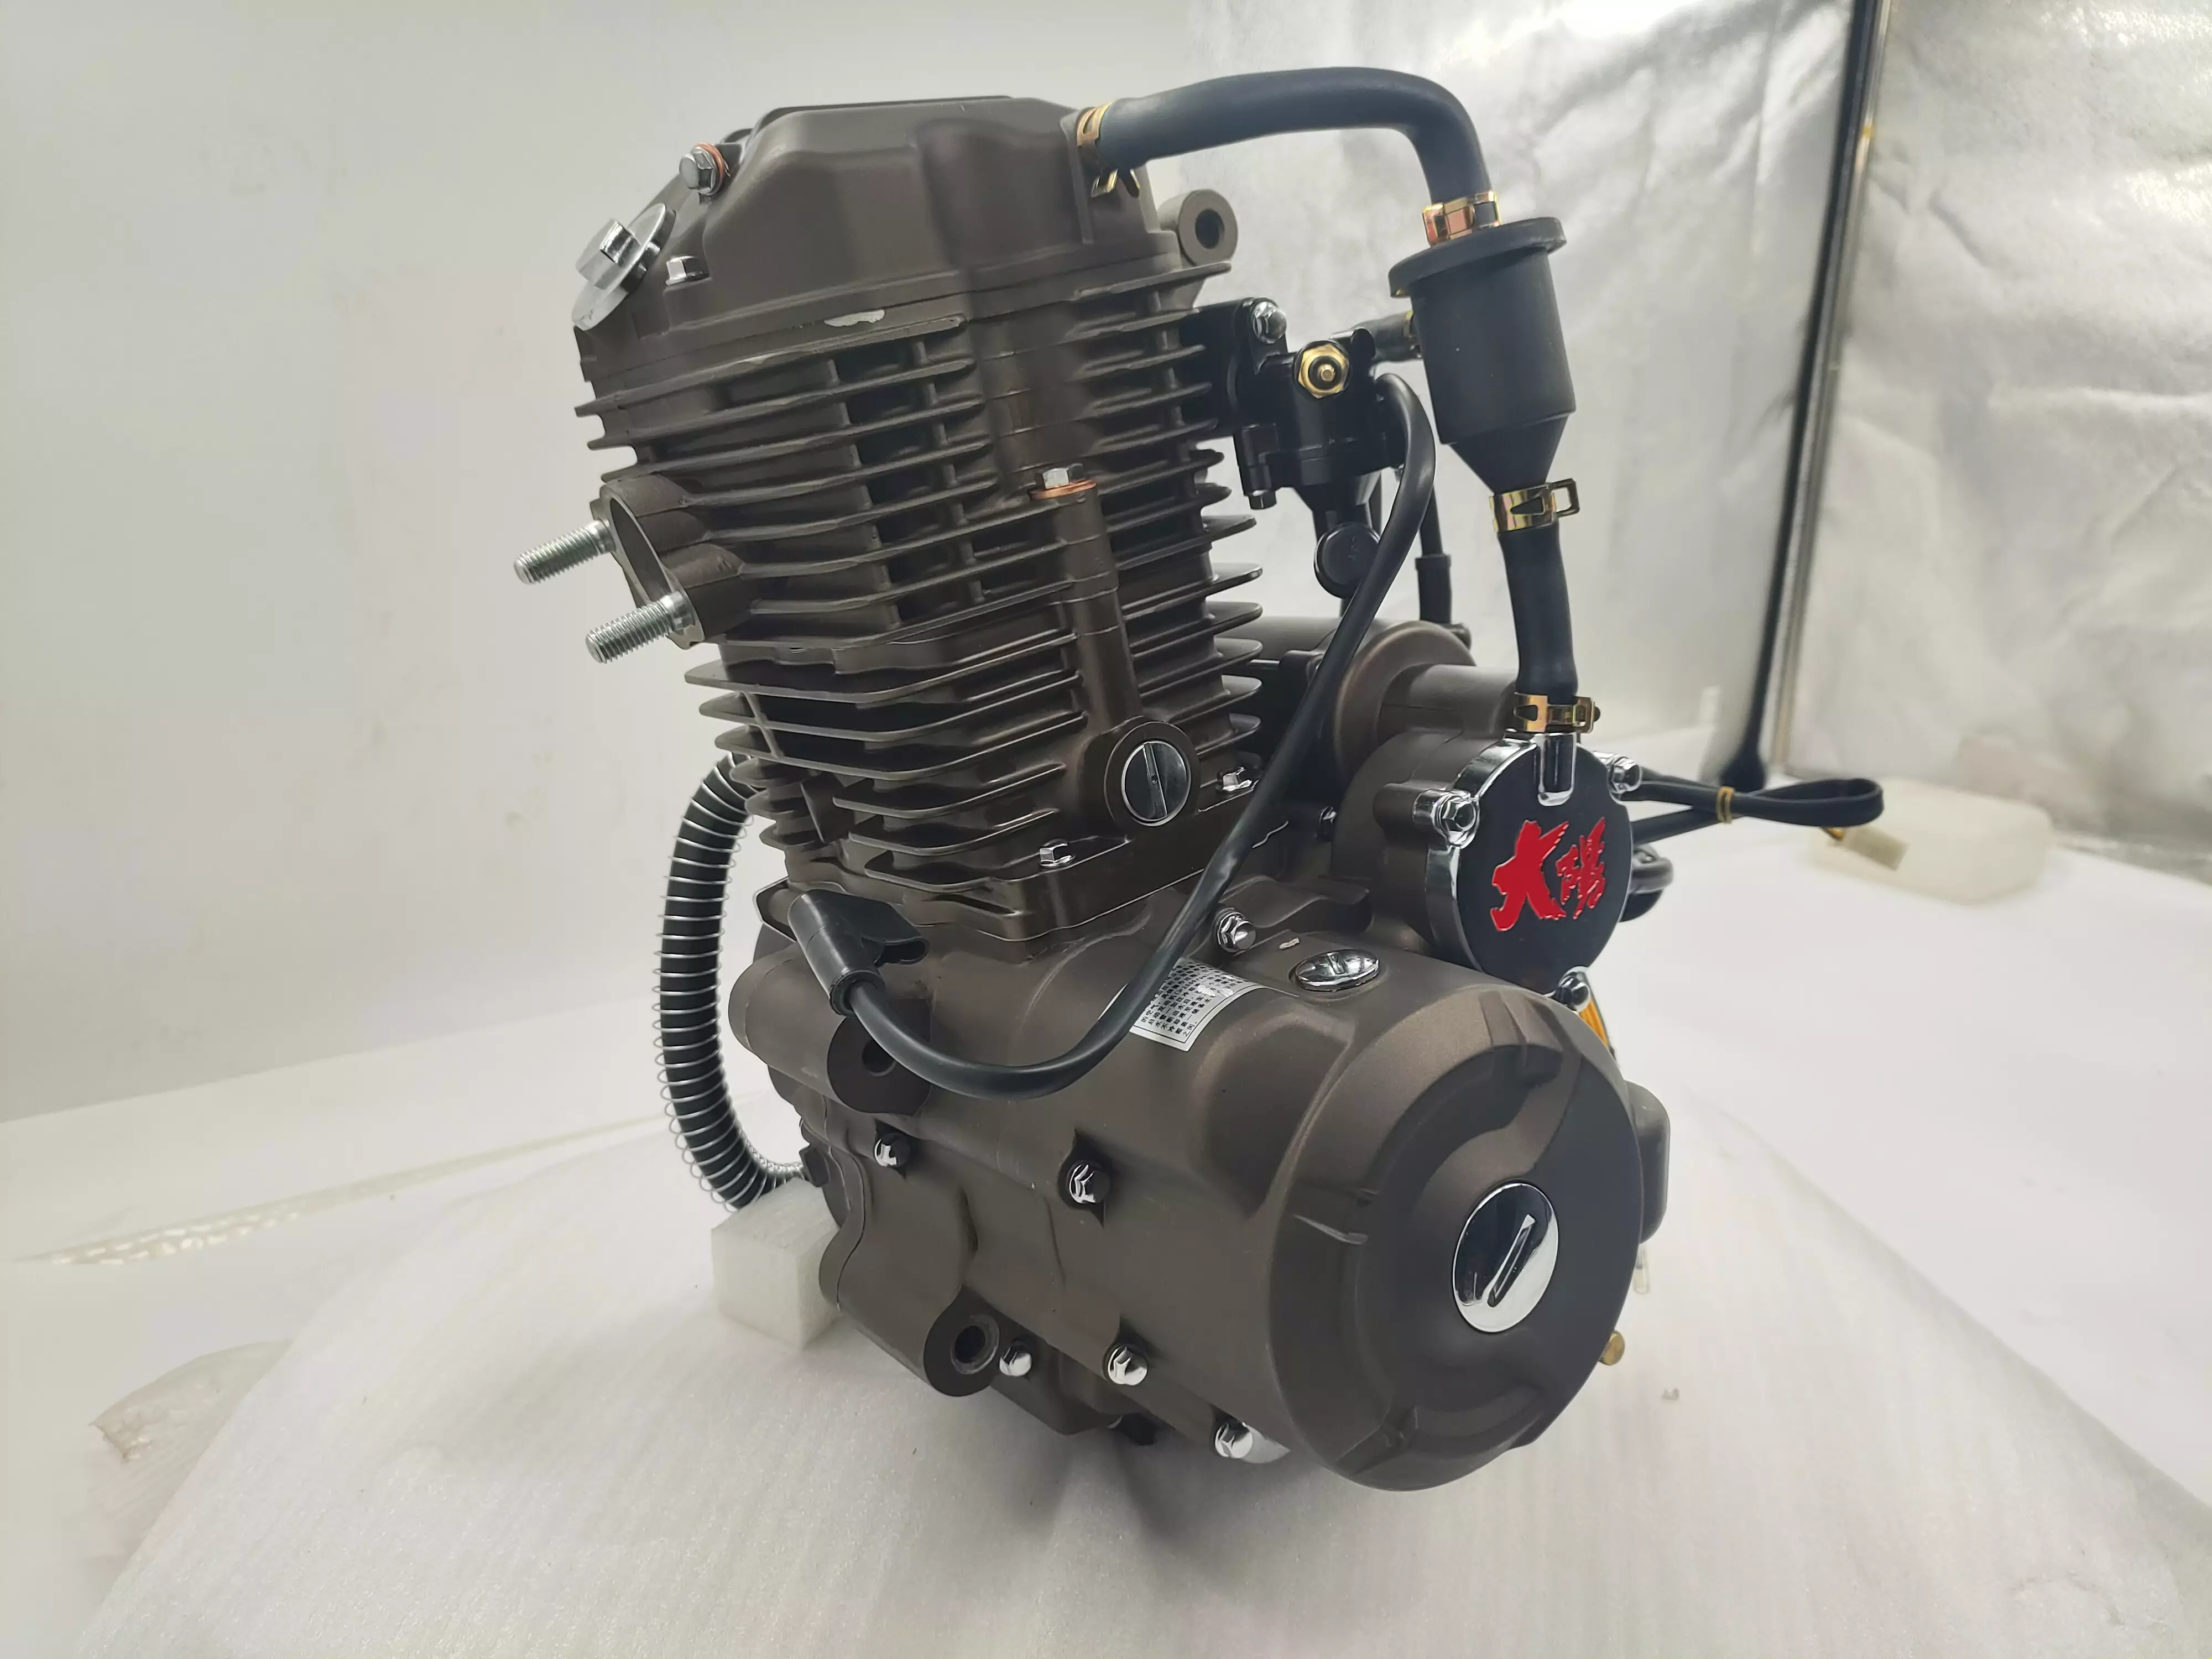 DAYANG CG300 New Super Cool Complete Motorcycle Cylinder China Chinese Motorcycle Engines Sea Electric /kick Start 300cc Engine